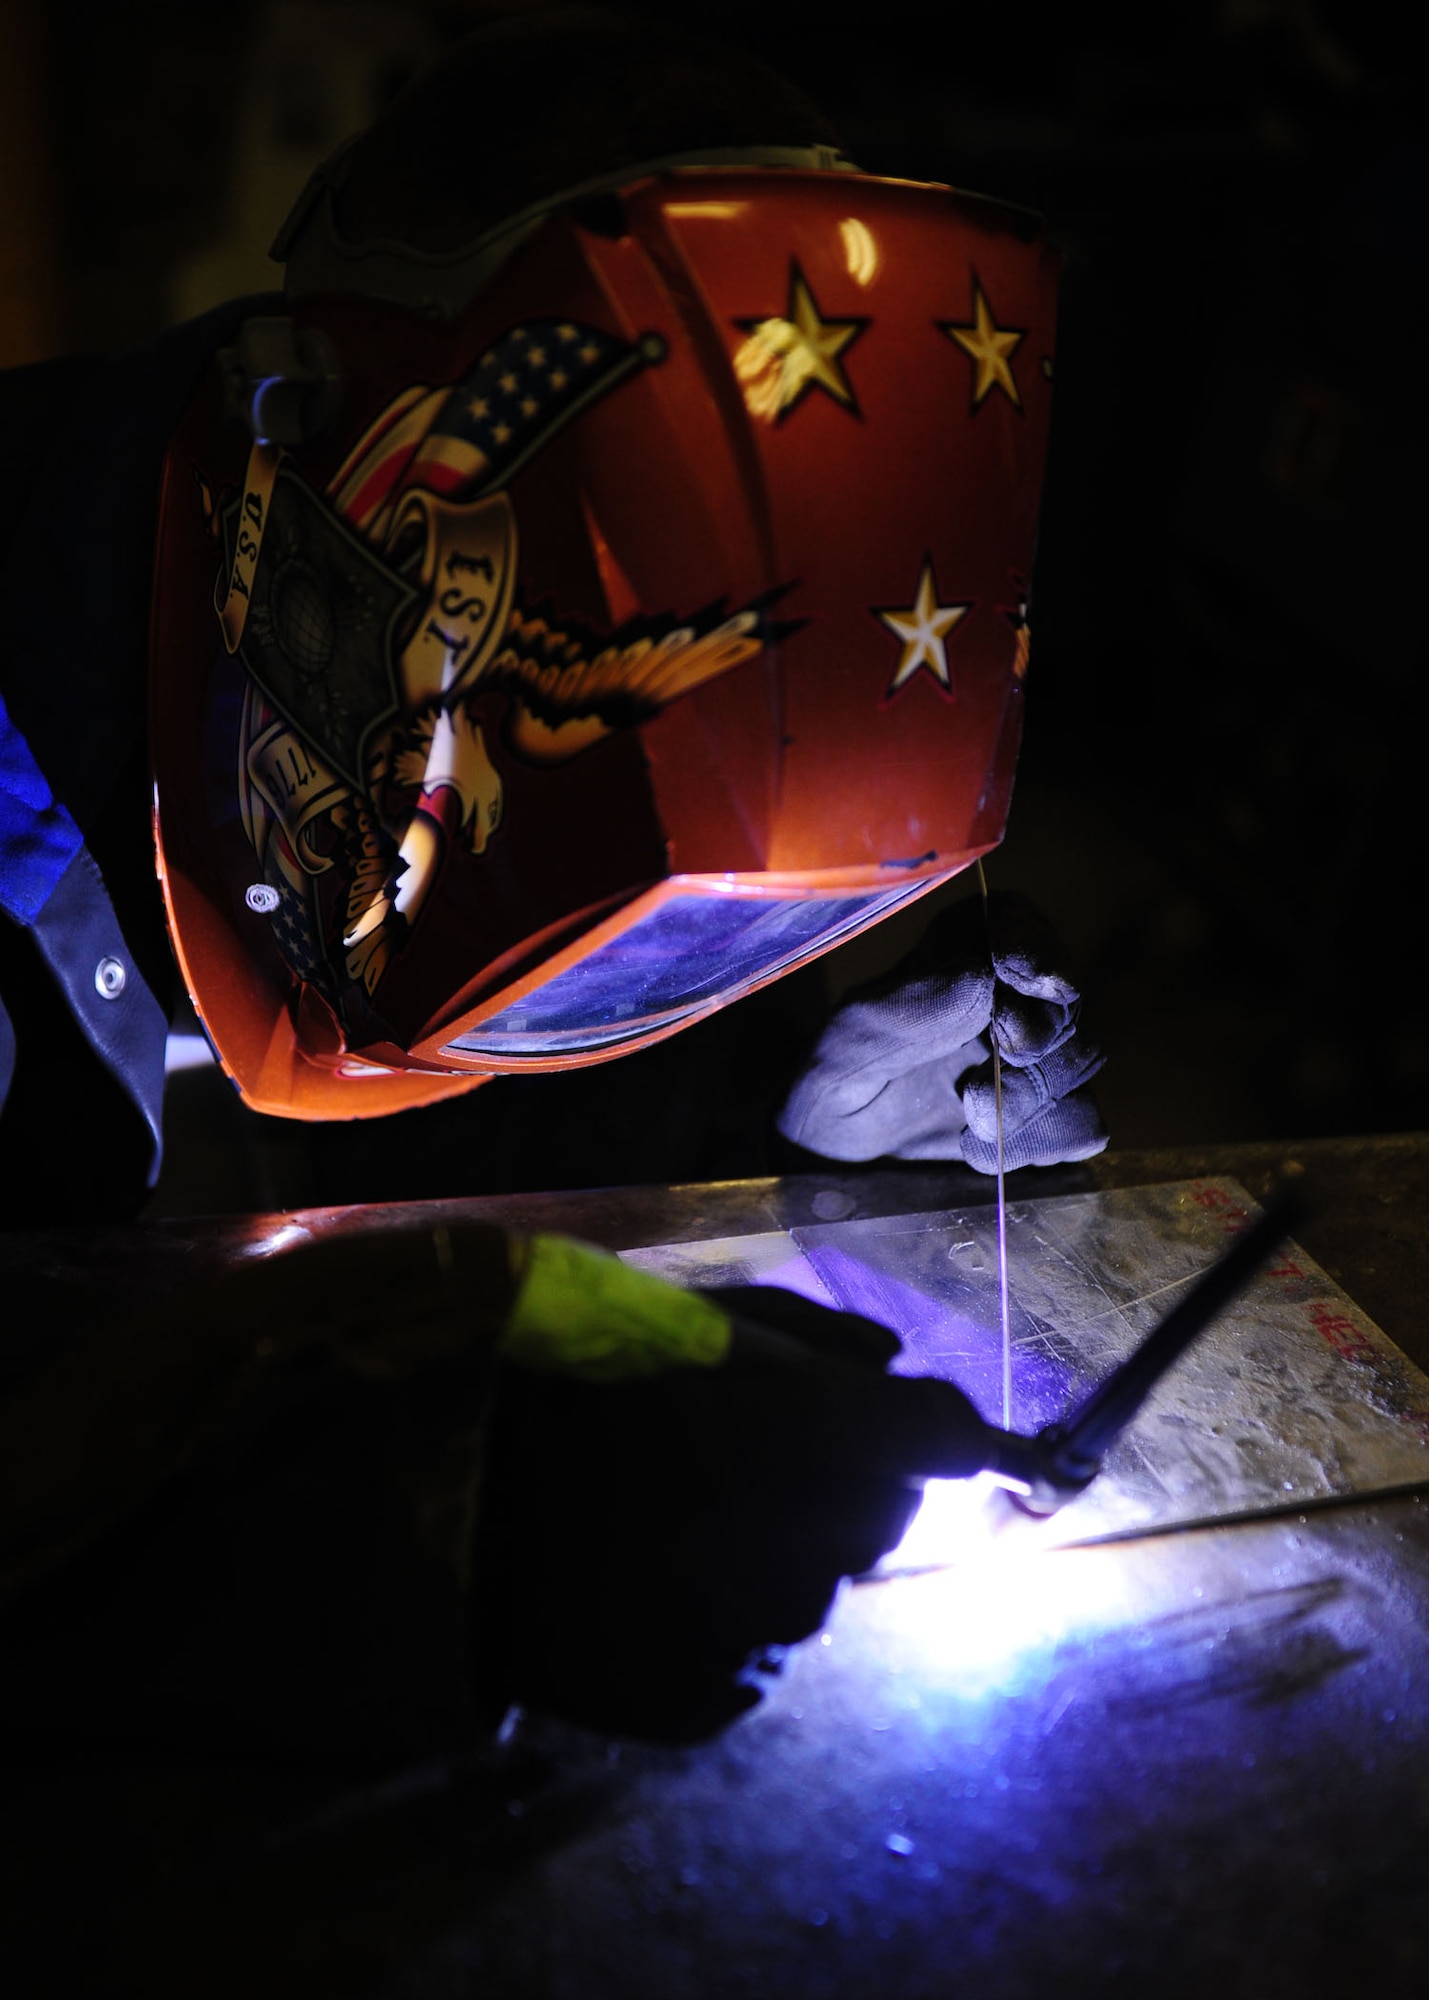 SOUTHWEST ASIA -- Staff Sgt. Todd Mathis, a metals technology craftsman from the 379th Expeditionary Aircraft Maintenance Squadron Aircraft Metals Technology Shop, uses a tungsten inert gas welder to bond two aluminum pieces together. Known as Metals Shop, their mission is to support aircraft and air ground equipment with skills in metal work; the only shop capable of working and welding exotic metals such as titanium, cobalt and nickel alloy. Metals Shop also fabricates aircraft parts and metal objects that no longer exist in supply inventory, thus keeping aircraft flying. (U.S. Air Force photo/Master Sgt. Brendan Kavanaugh)